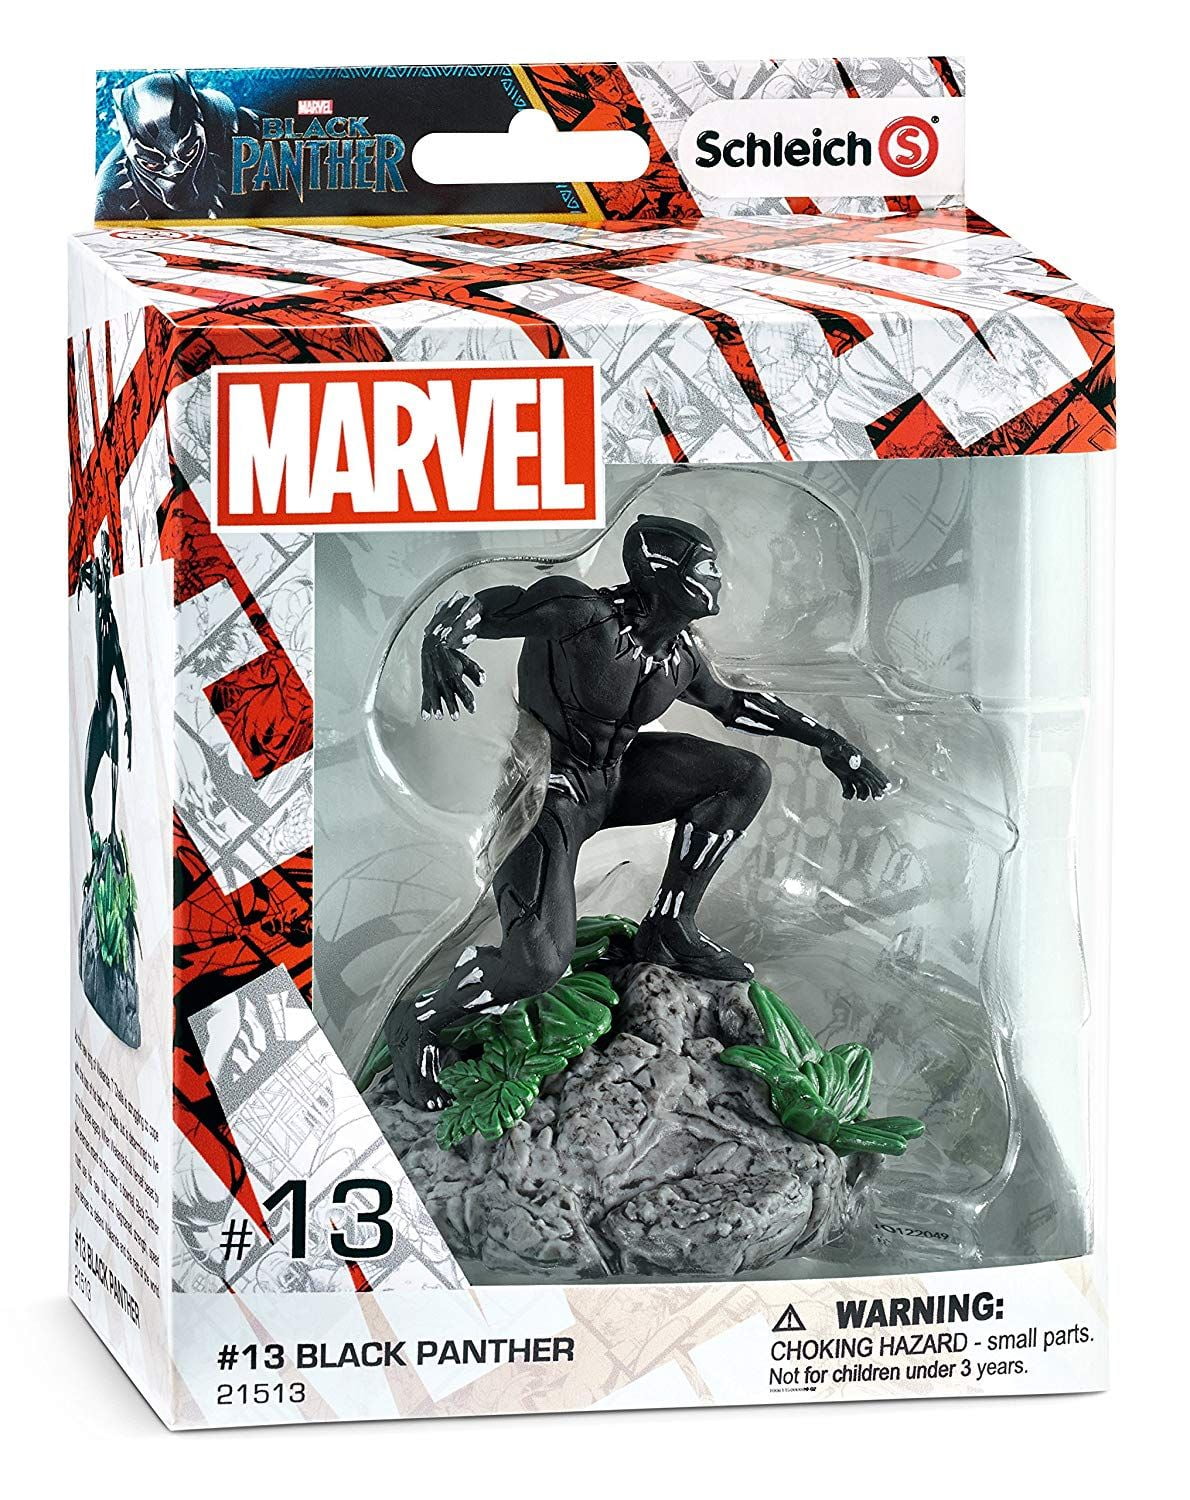 Schleich Plastic Figure 21513 Black Panther Marvel Figurines New in Box 